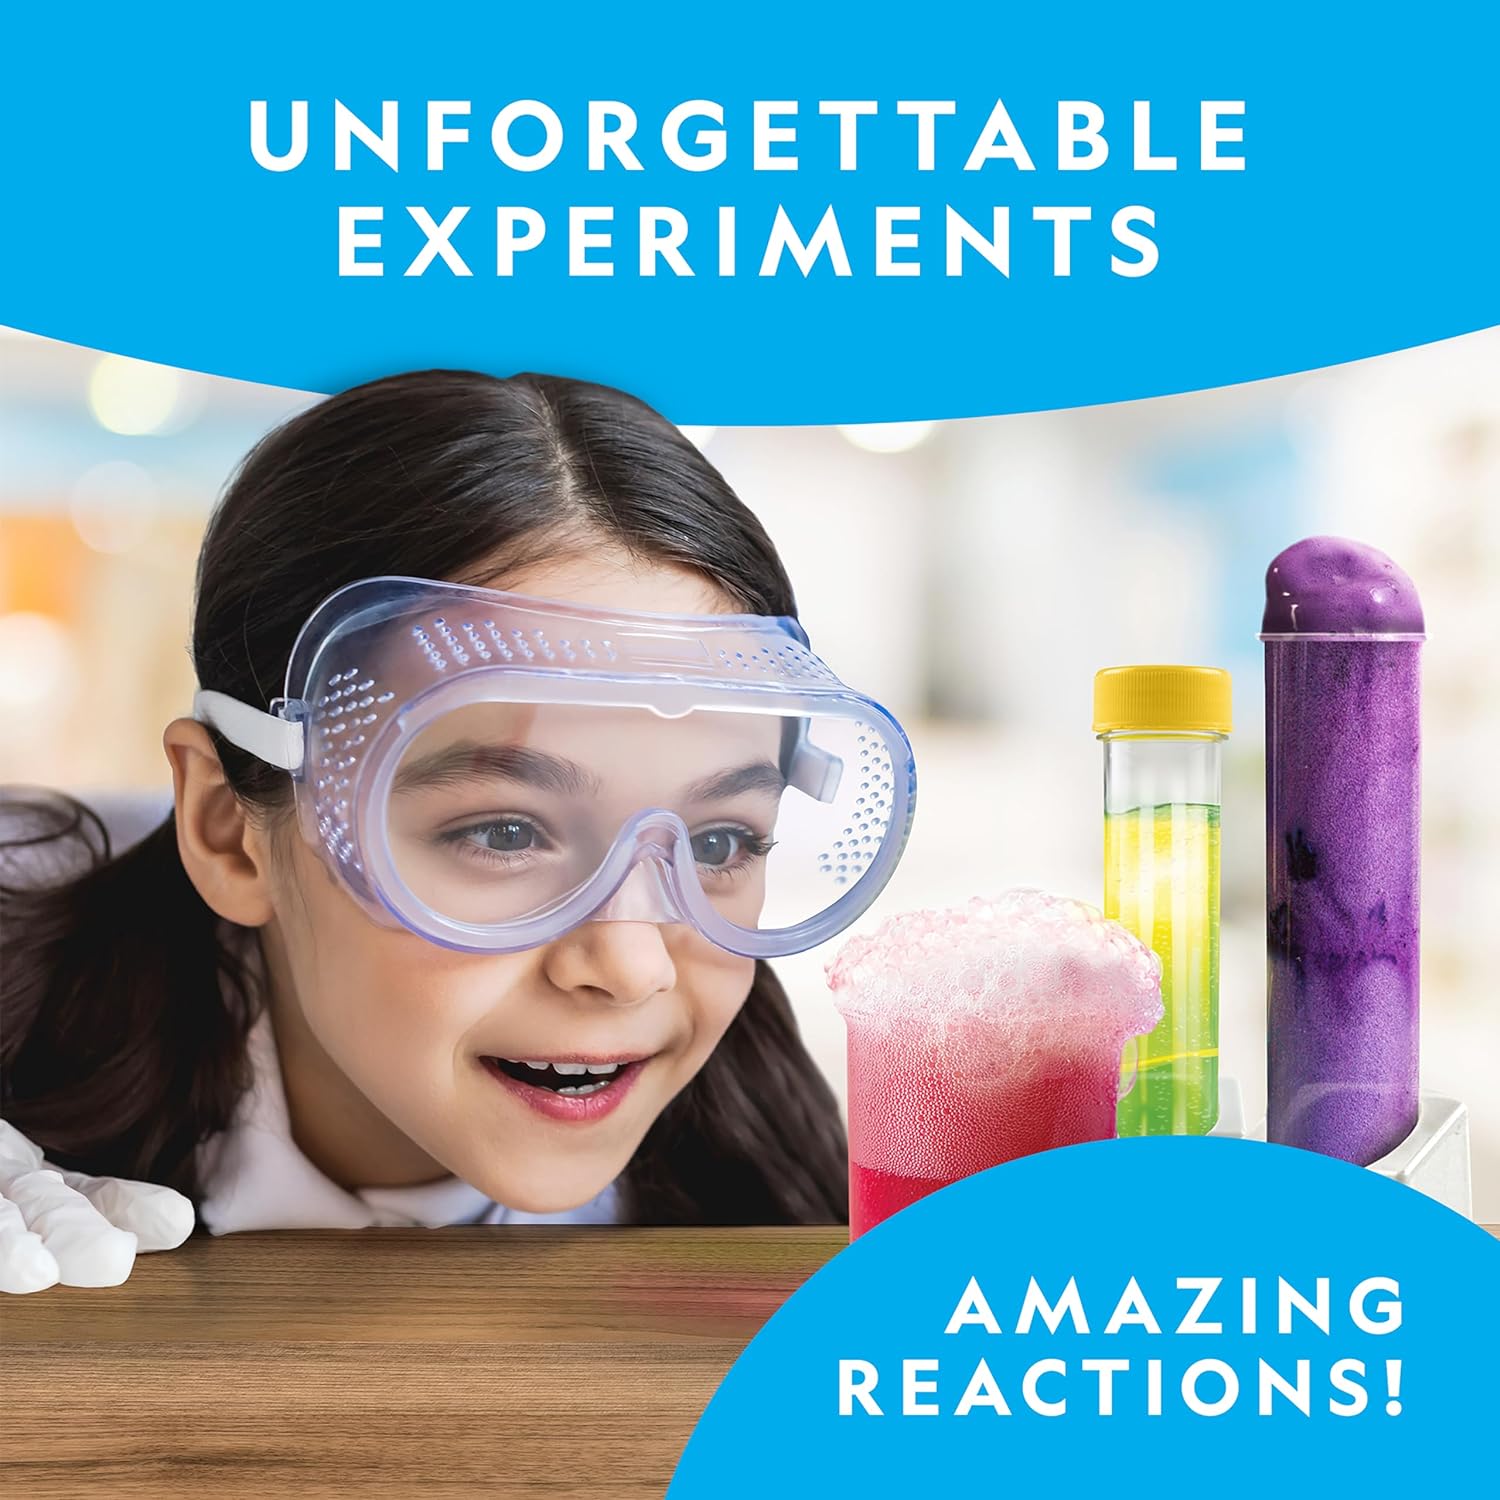 NATIONAL GEOGRAPHIC Amazing Chemistry Set - Chemistry Kit with 45 Science Experiments Including Crystal Growing and Reactions , STEM Gift for Kids, Boys & Girls (Amazon Exclusive)